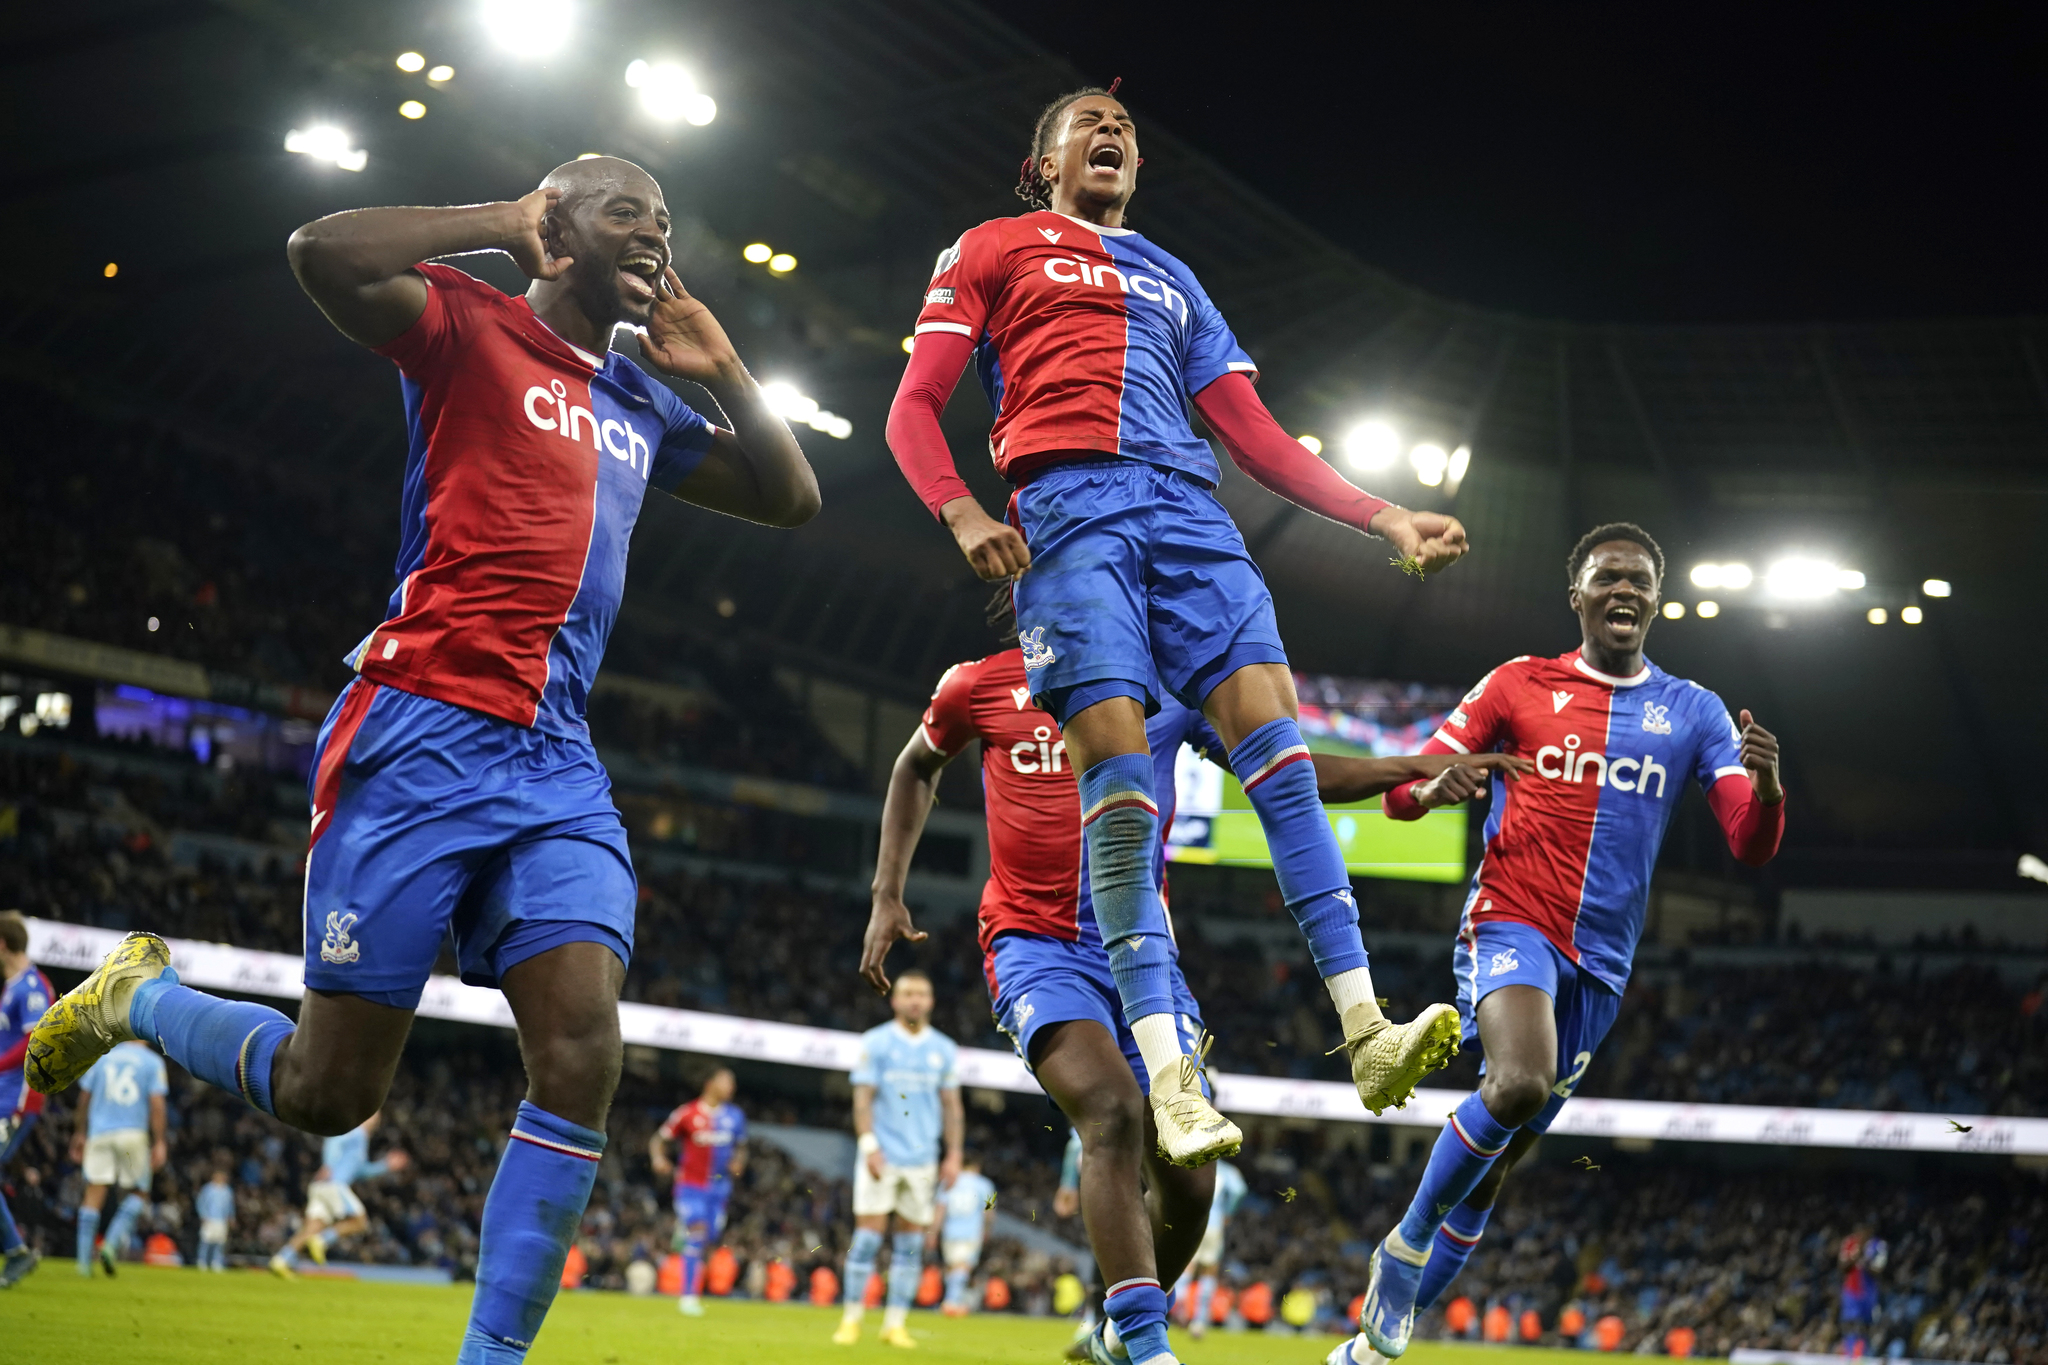 Crystal Palace players celebrate after Crystal Palaces Michael Olise scores